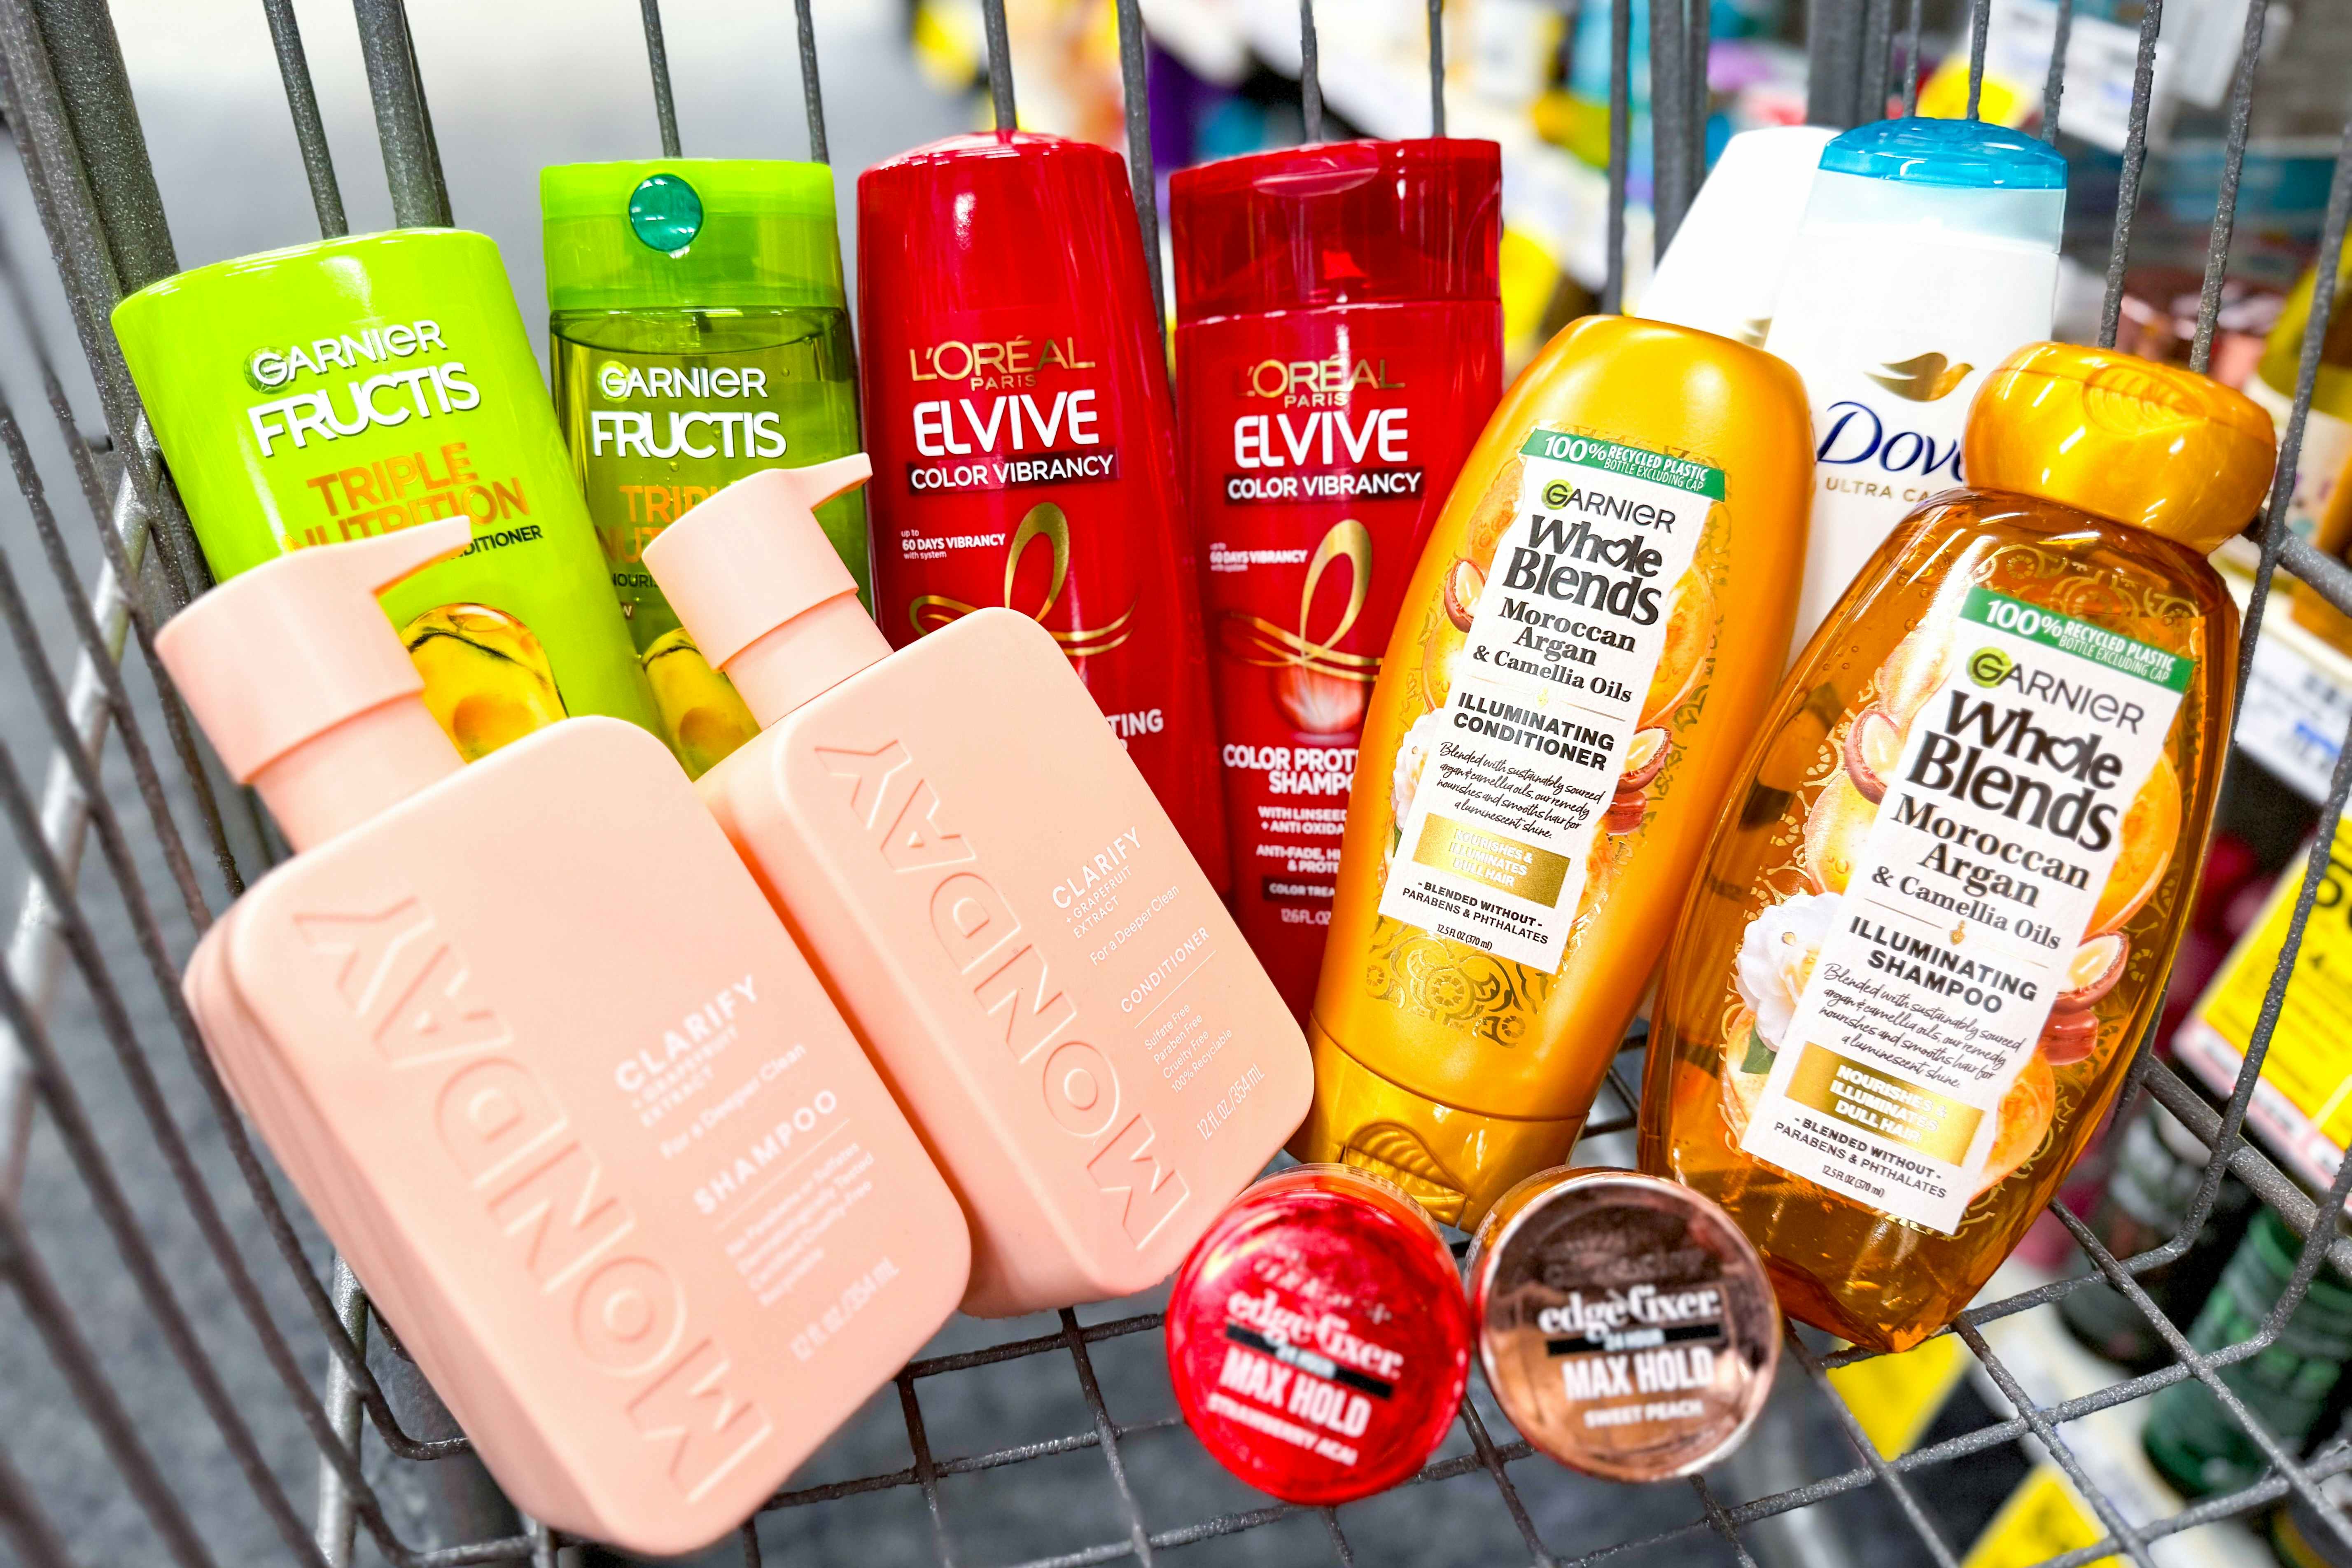 CVS Big Hair Event: Get 12 Products for $8.10 (Just $0.68 Each)